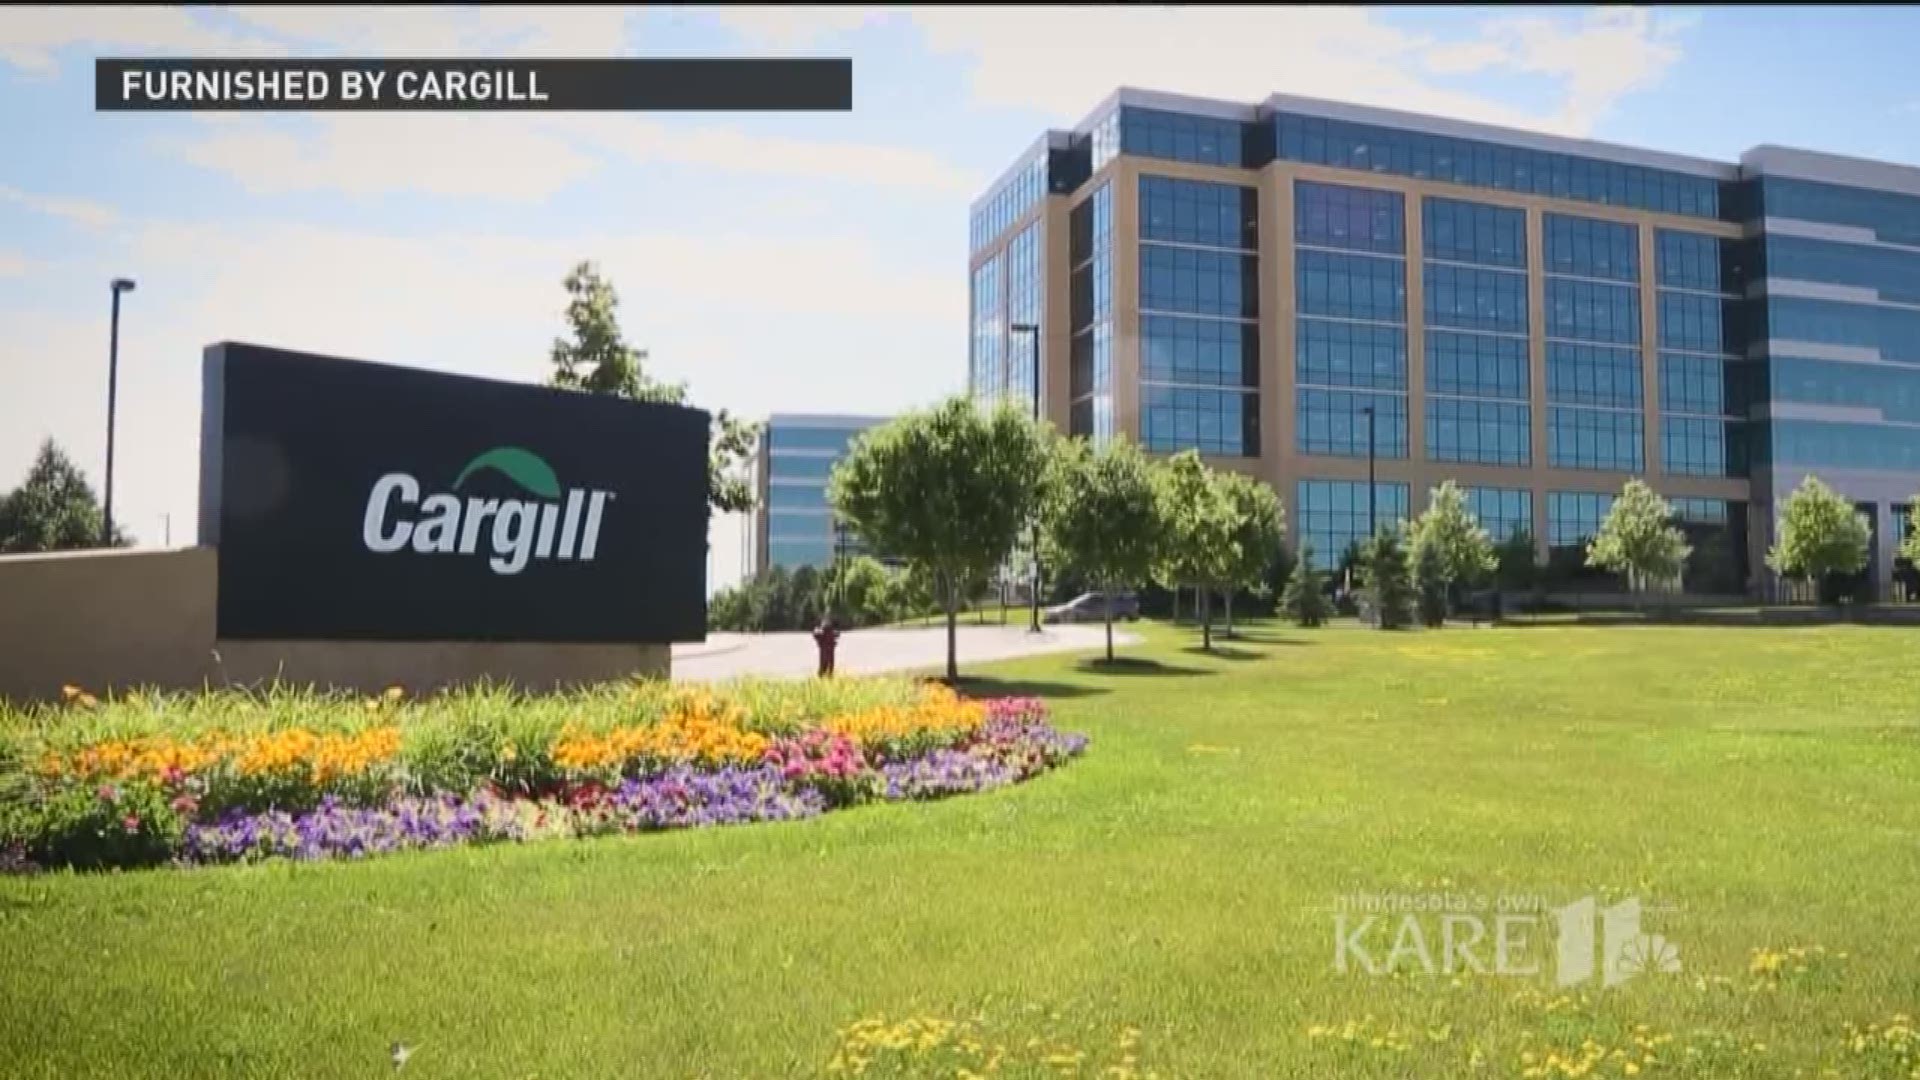 MN-based Cargill has banned the use of cell phones for employees while they are driving, not even hands-free models.